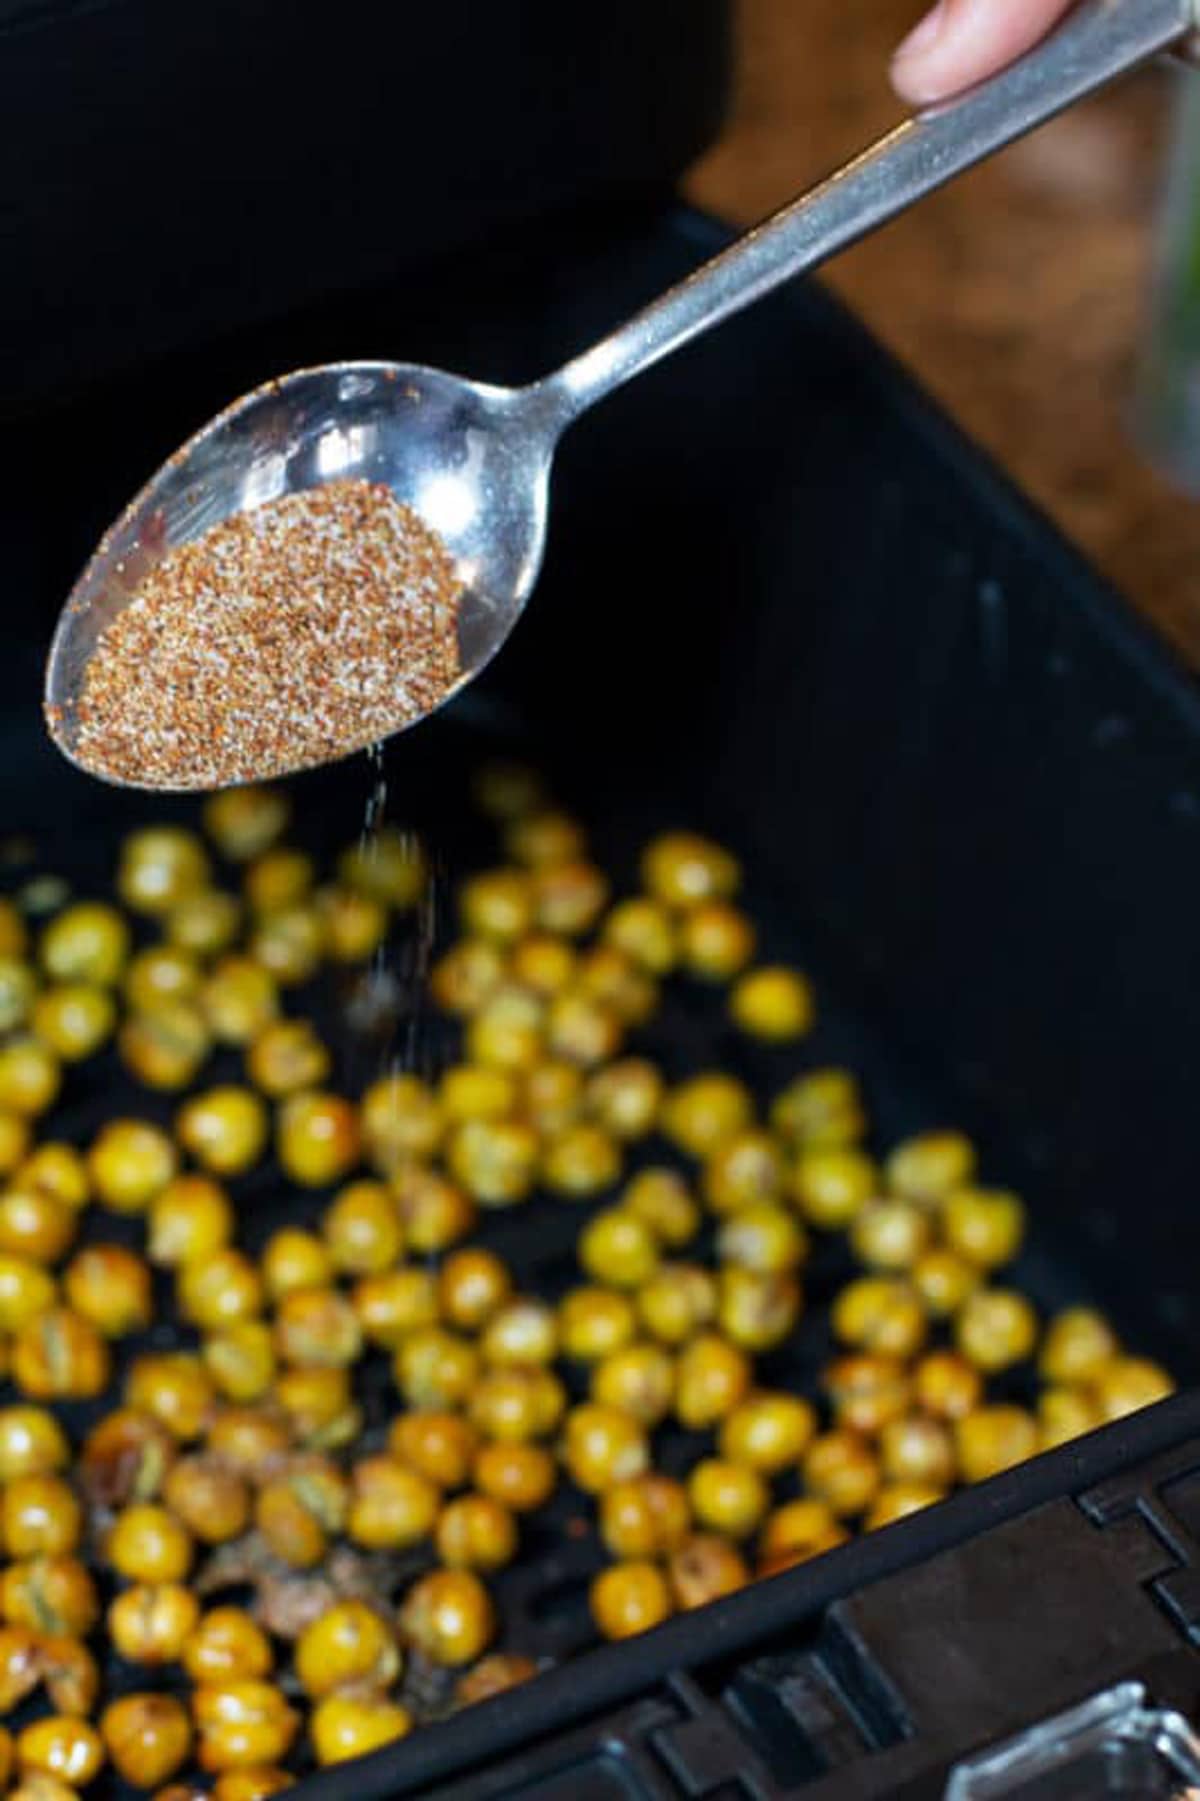 Spoonful of chili lime seasoning being poured onto chickpeas in an air fryer.